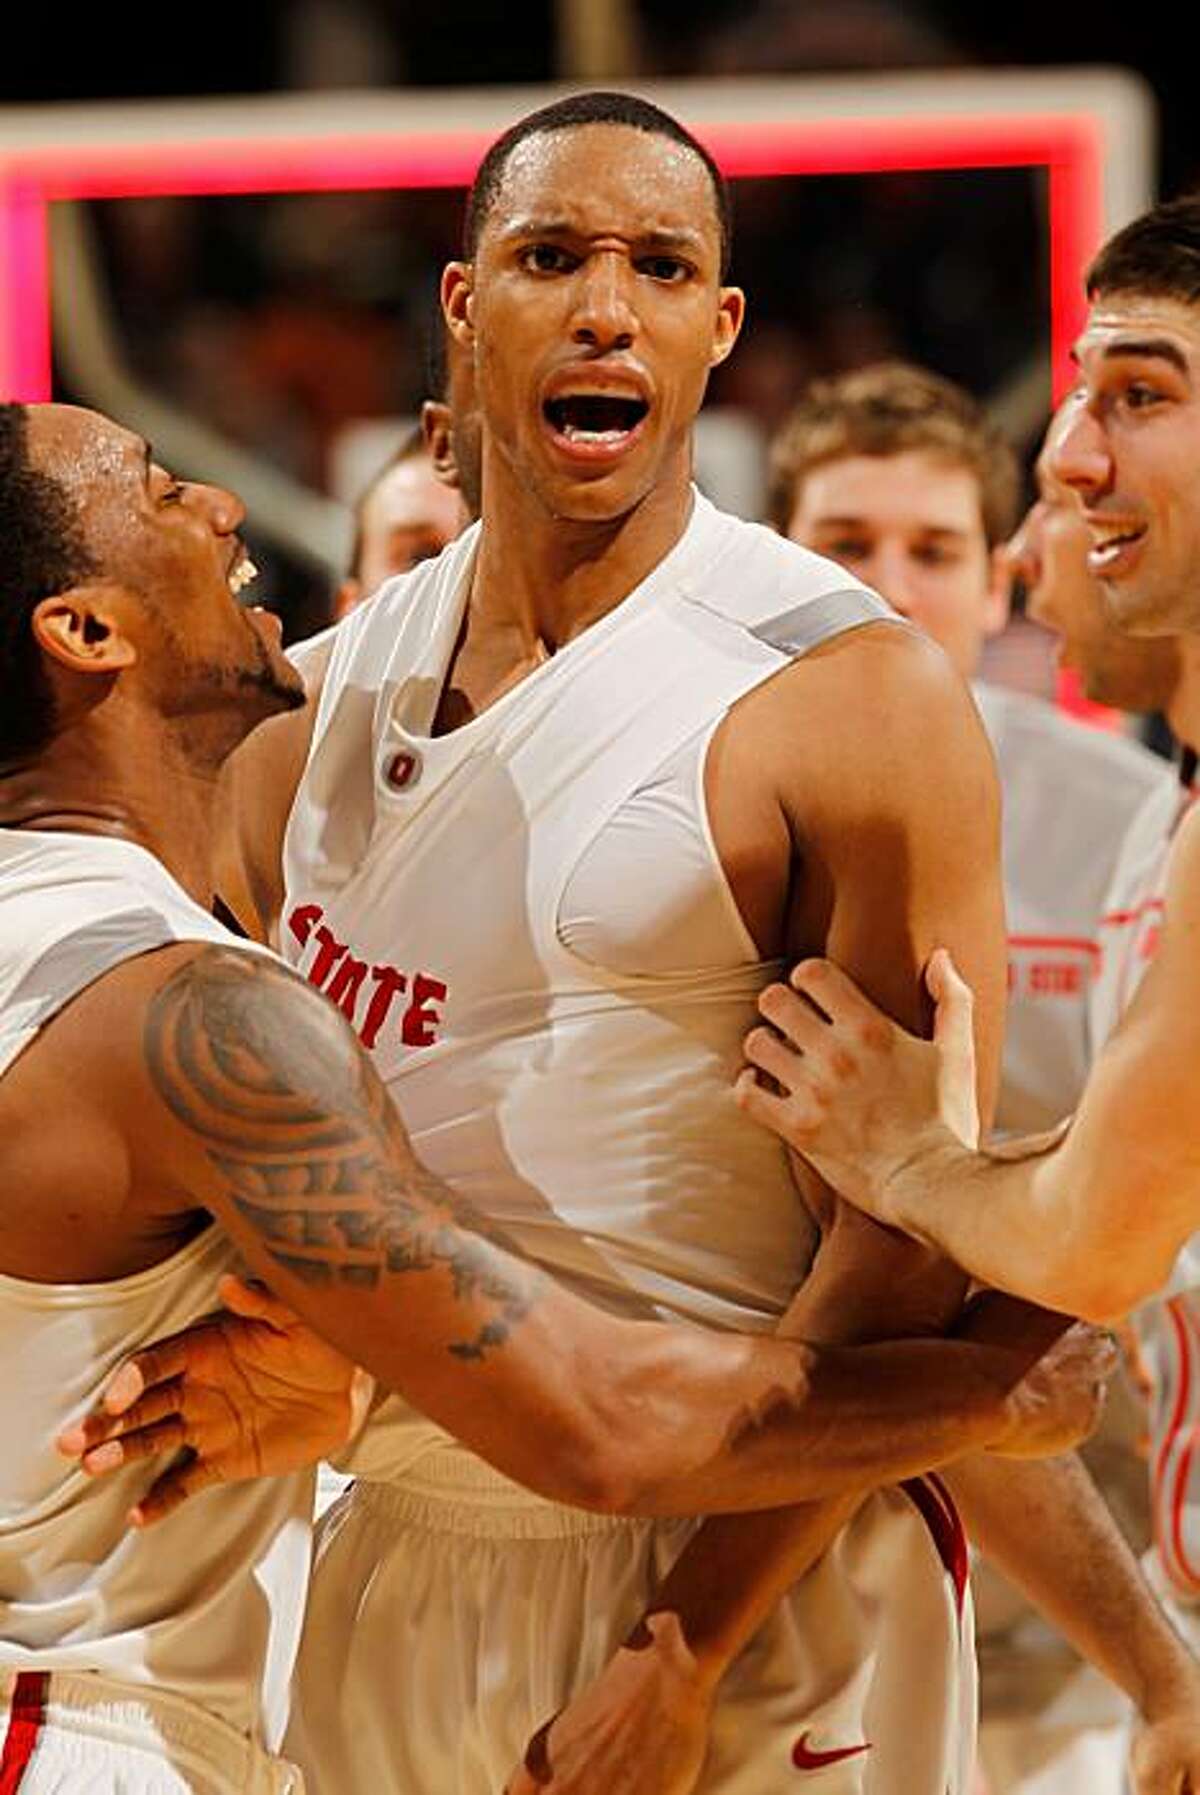 INDIANAPOLIS - MARCH 12: Guard Evan Turner #21 of the Ohio State Buckeyes celebrates with his teammates after making a game winning three point basket to win their quarterfinal game against the Michigan Wolverines in the Big Ten Men's Basketball Tournament at Conseco Fieldhouse on March 12, 2010 in Indianapolis, Indiana.